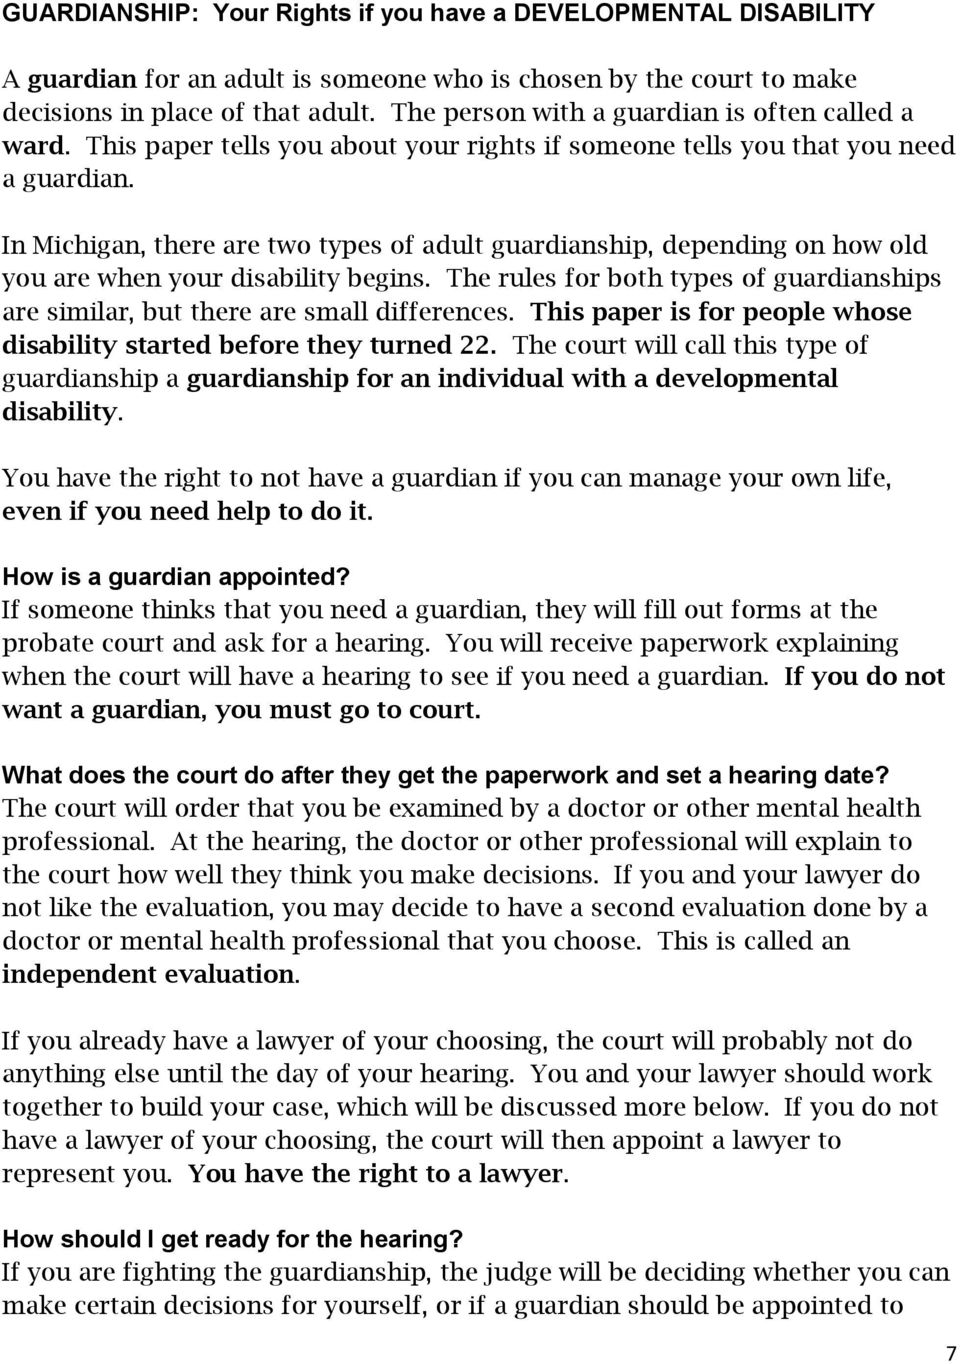 In Michigan, there are two types of adult guardianship, depending on how old you are when your disability begins.